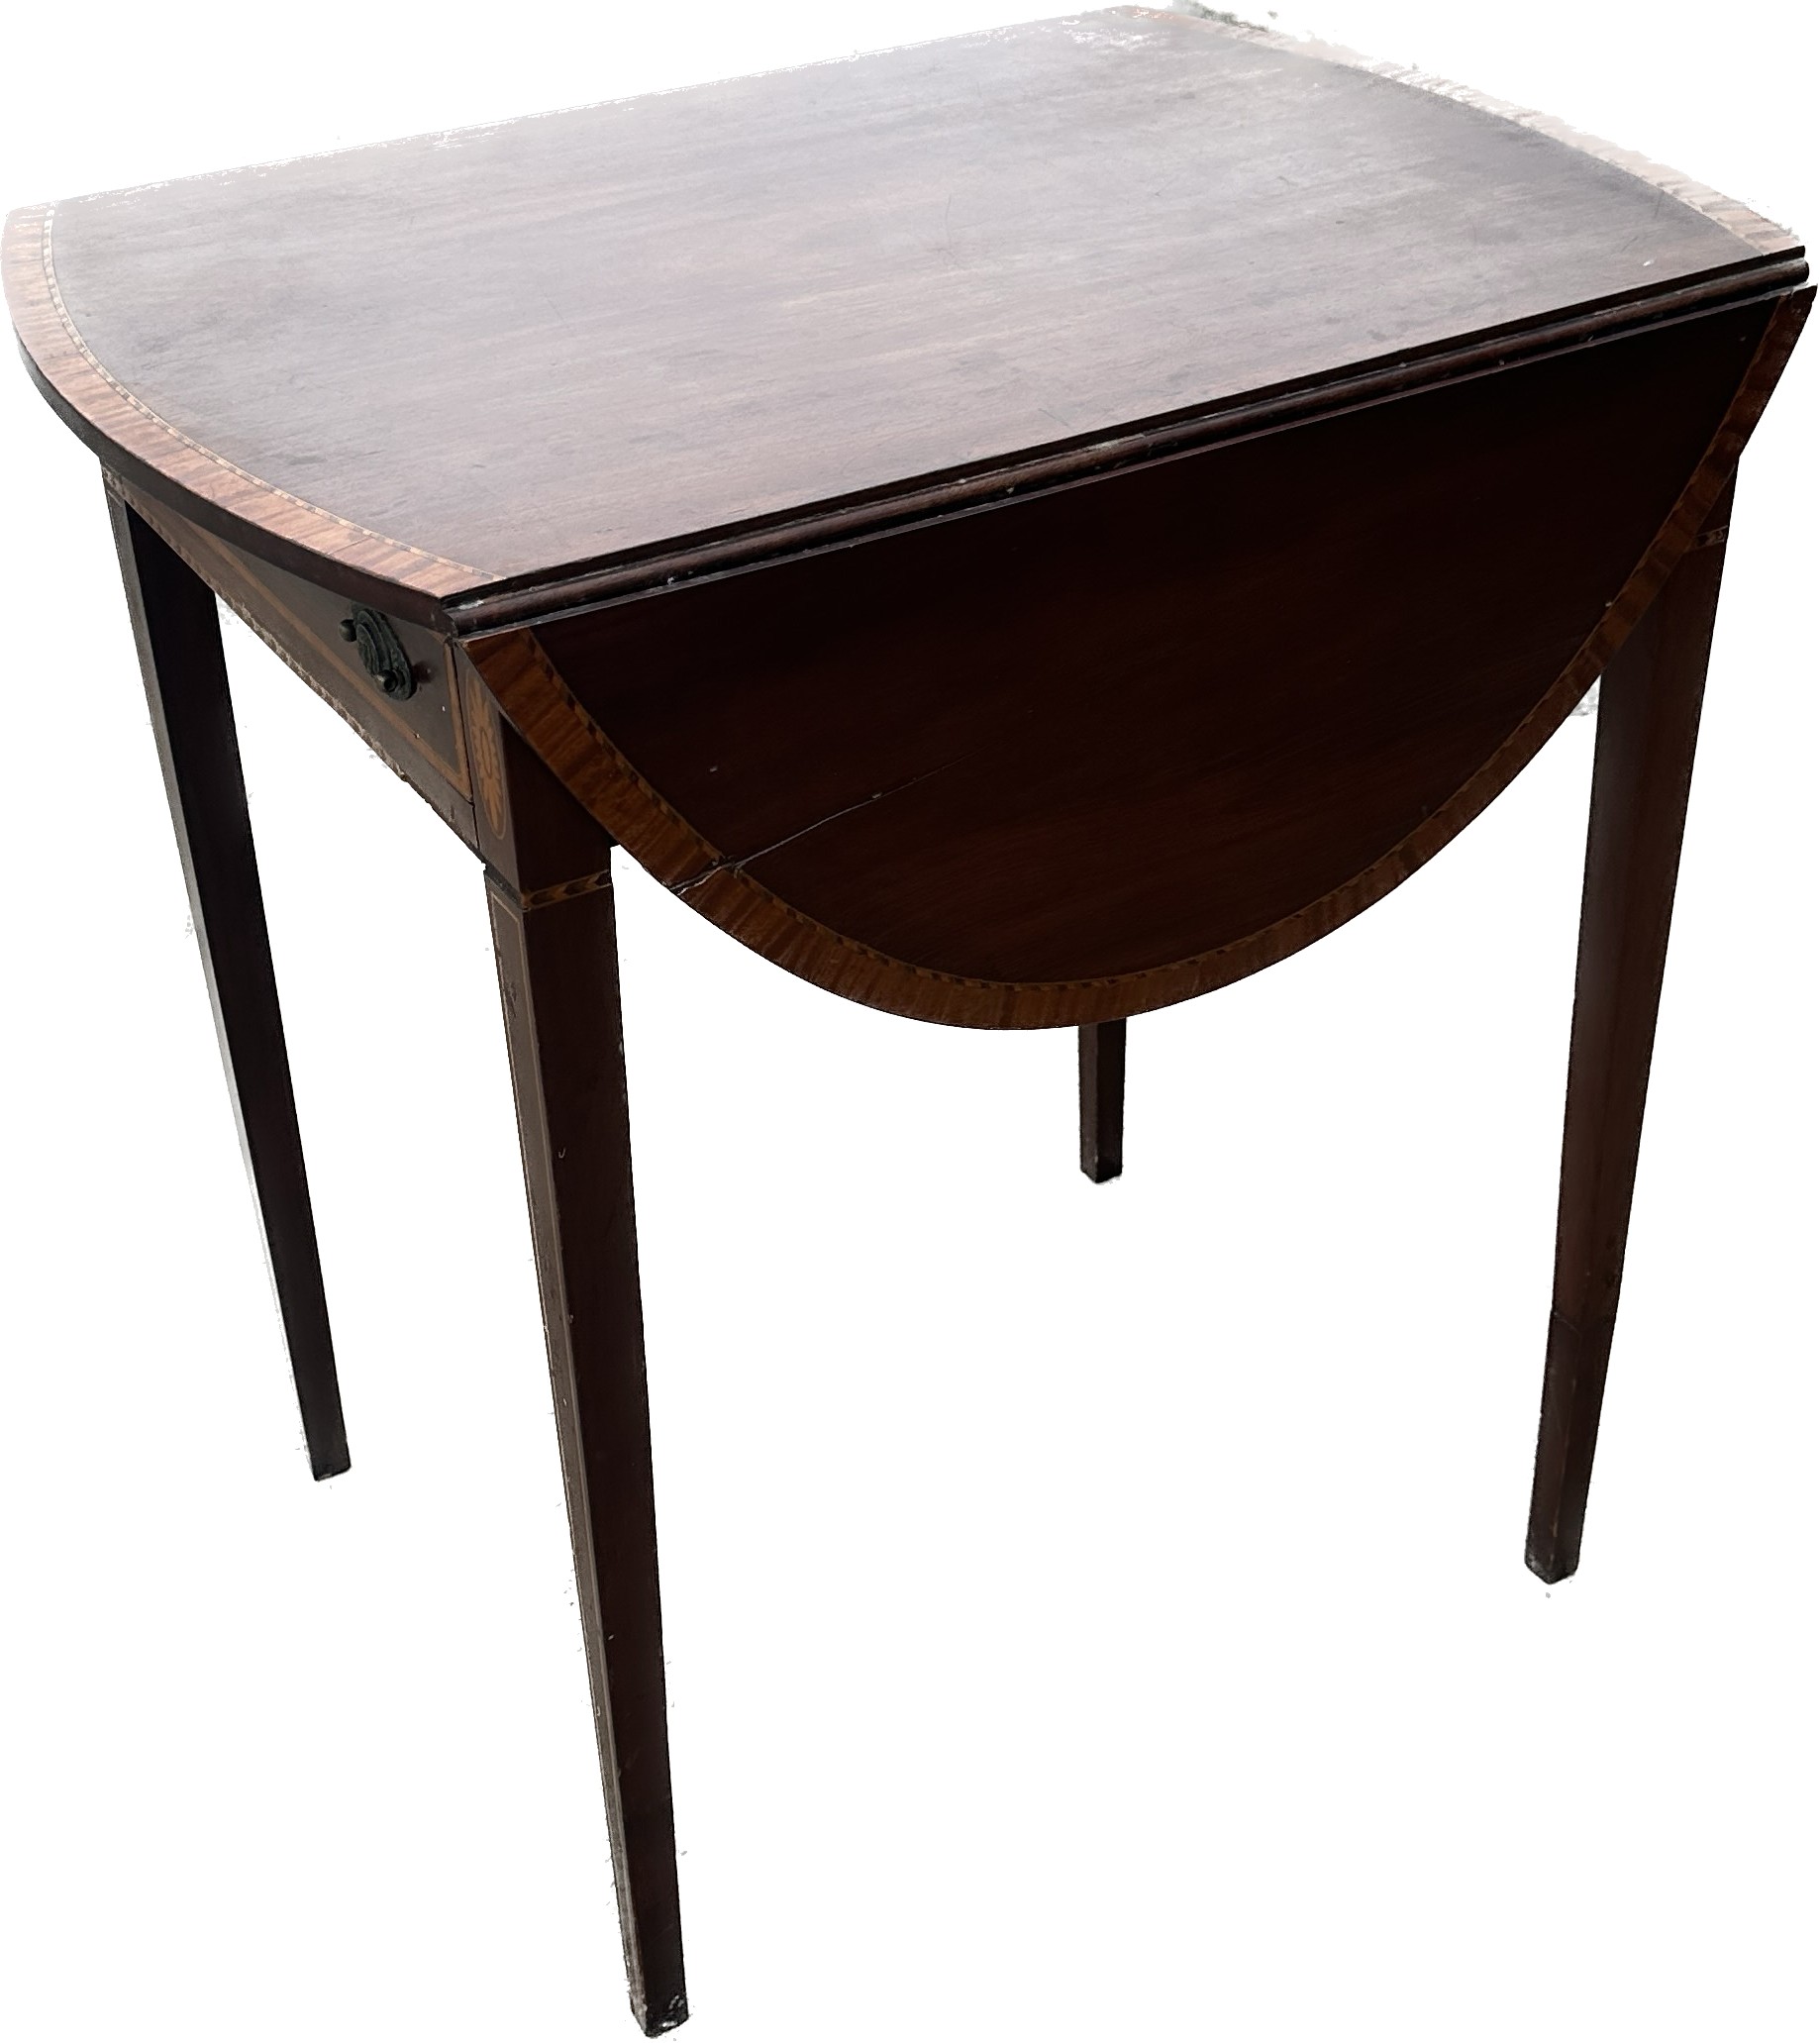 Mahogany inlaid drop leaf table with drawer measures approx with leaf down 29 inches tall by 20 wide - Image 2 of 2